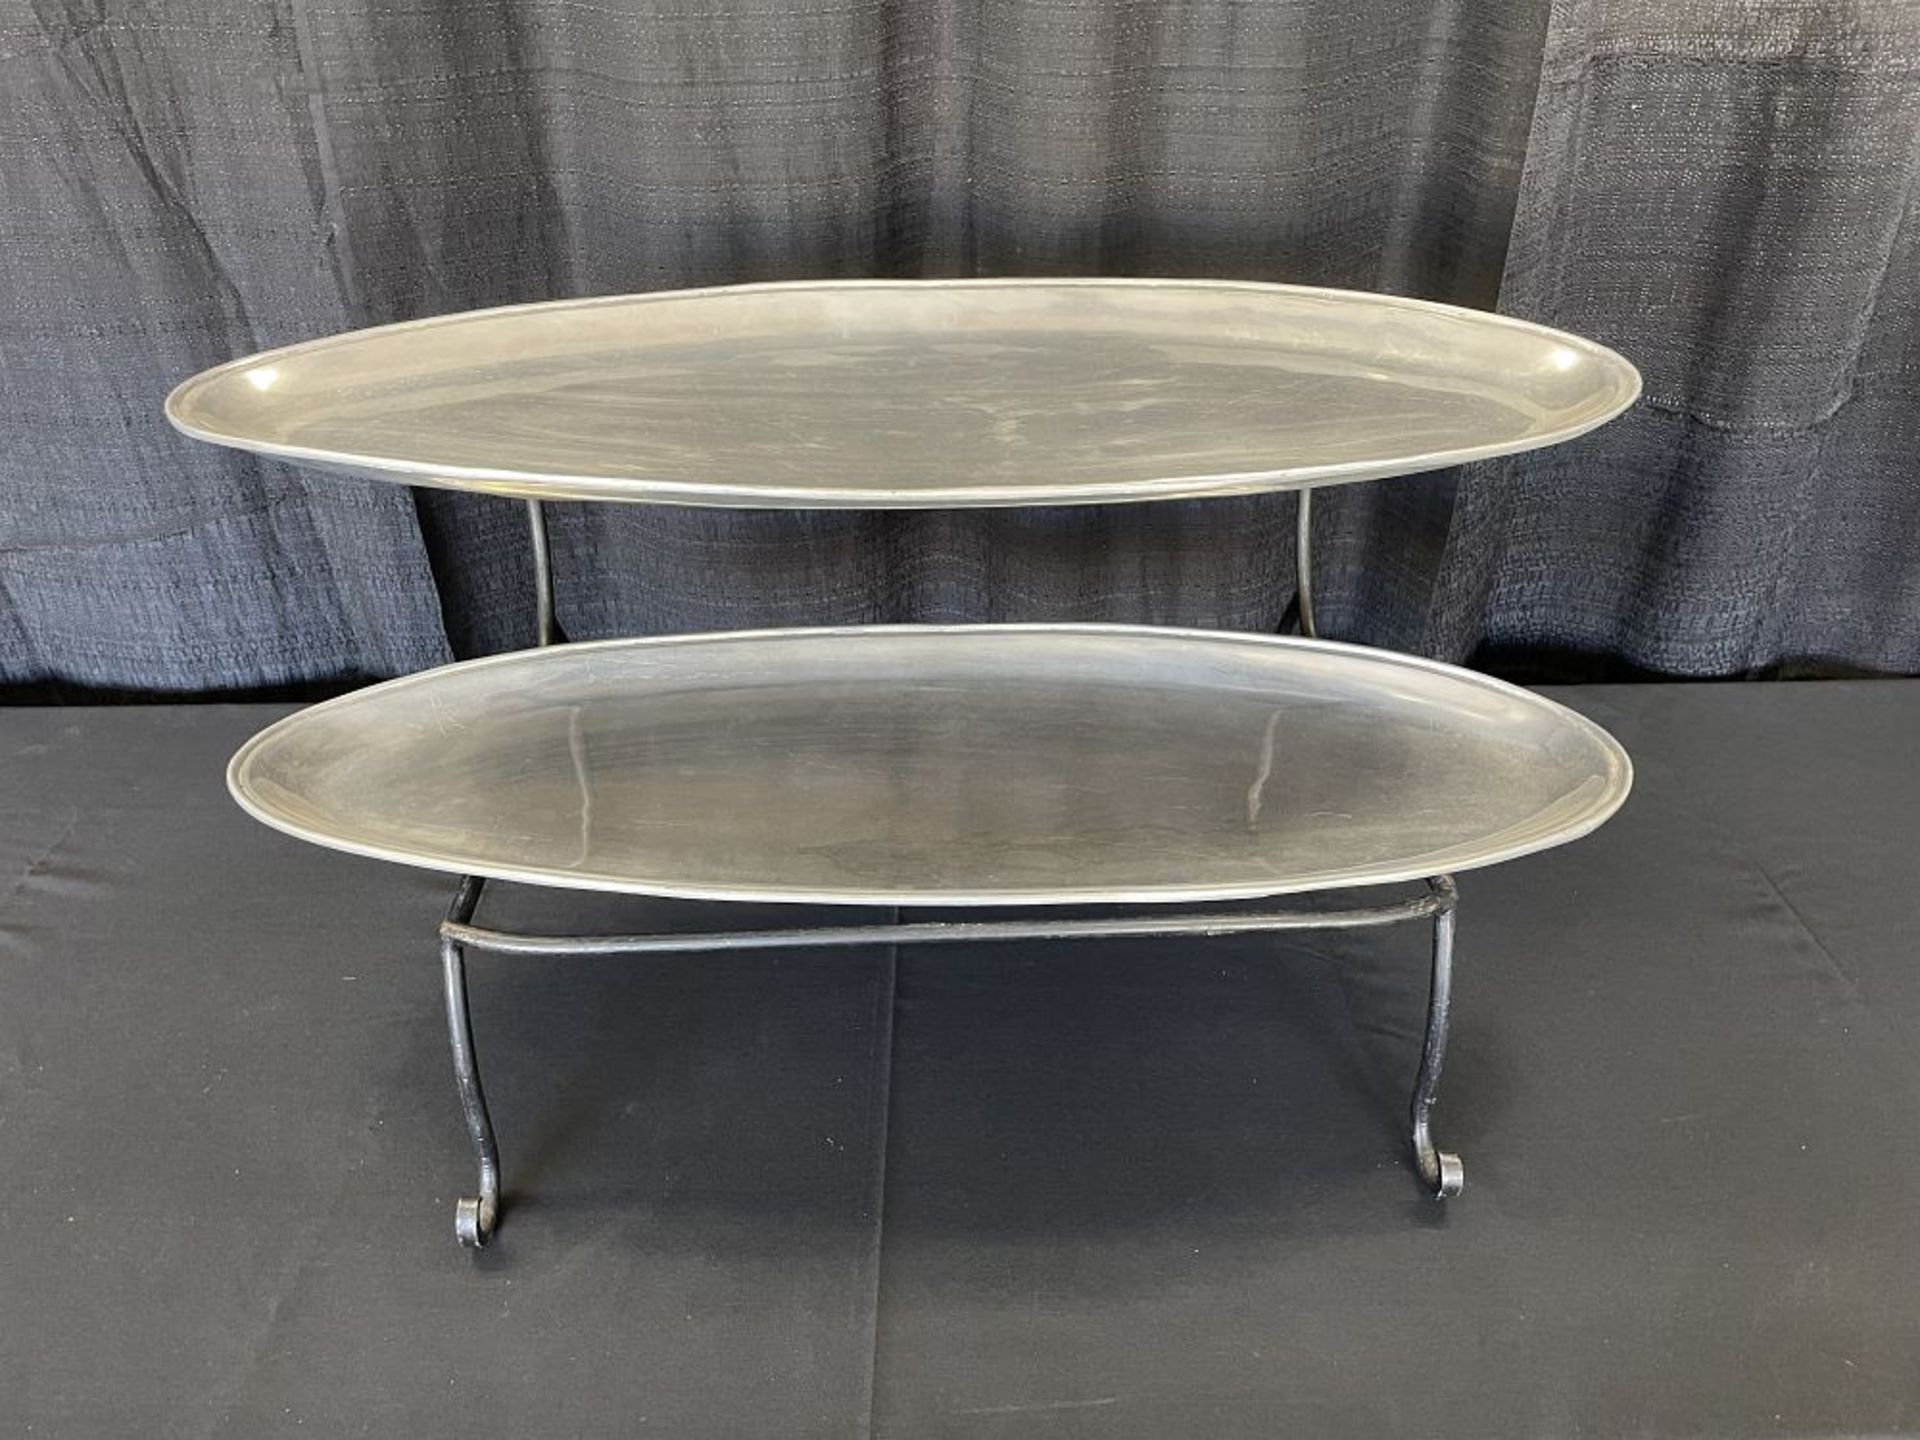 12" x 35" Oval Double Metal Serving Tray w/ Stand